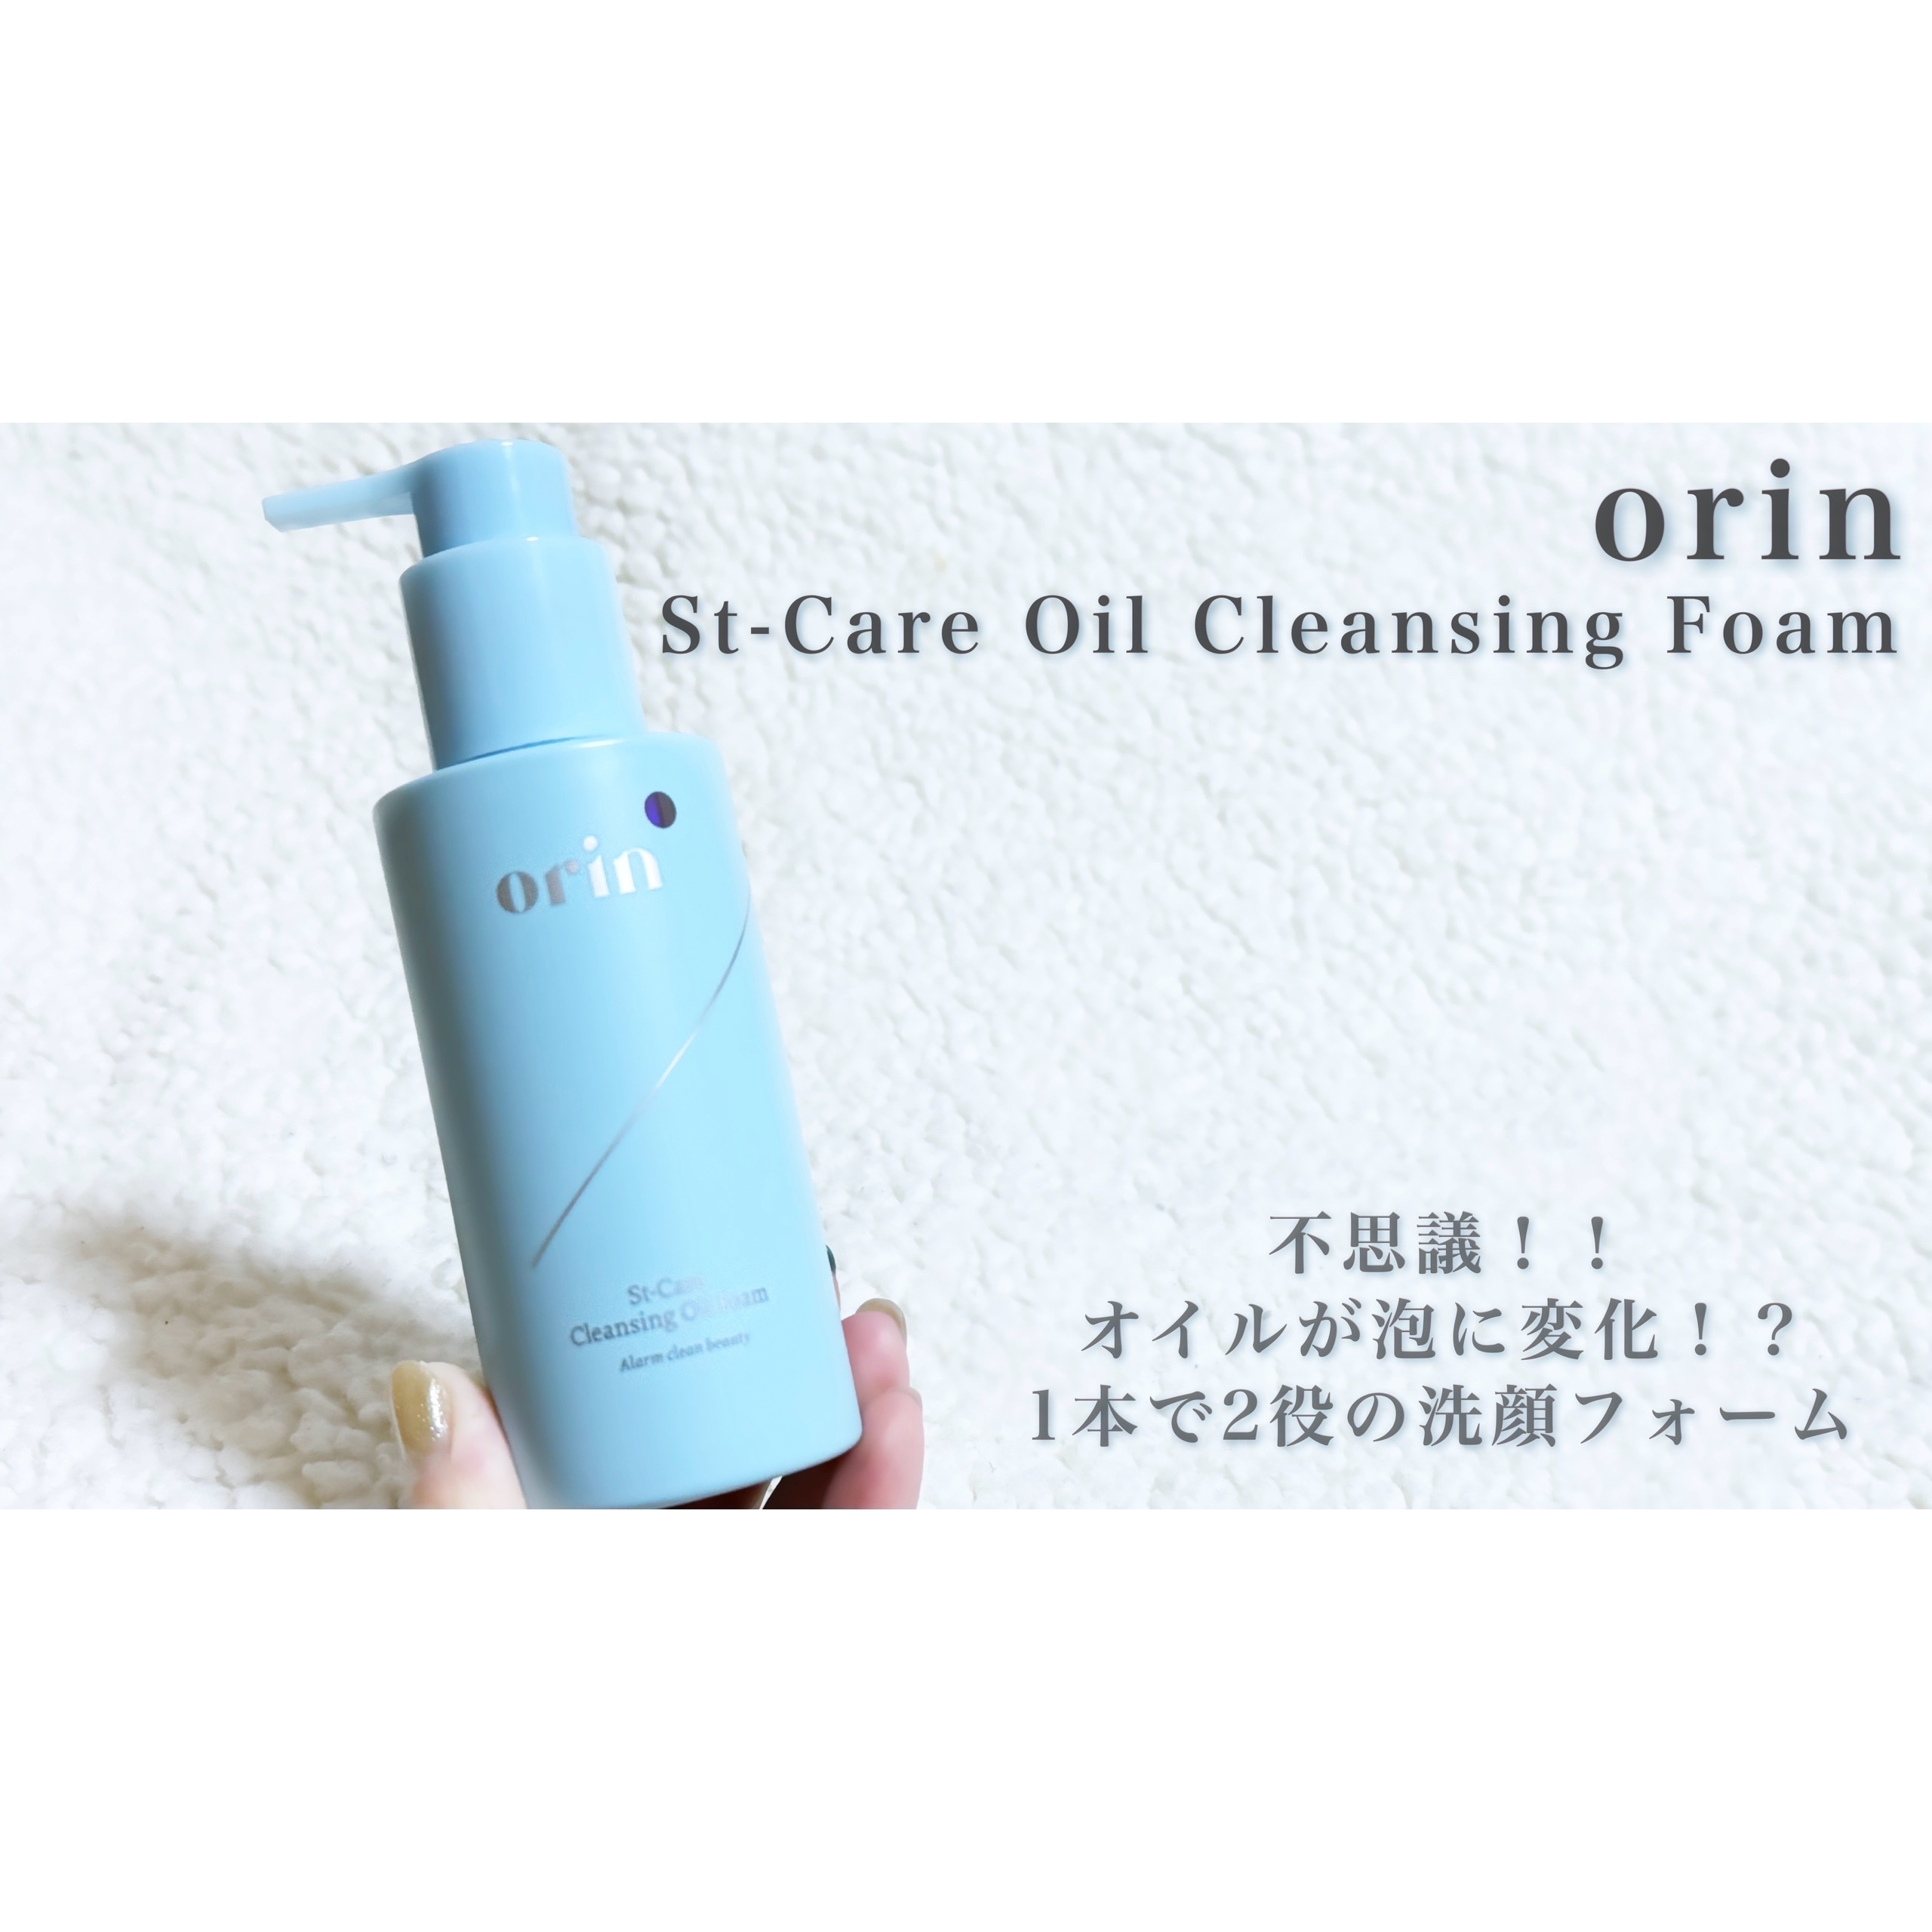 orinSt-Care Oil Cleansing Foamを使ったcosmemo2021さんのクチコミ画像1